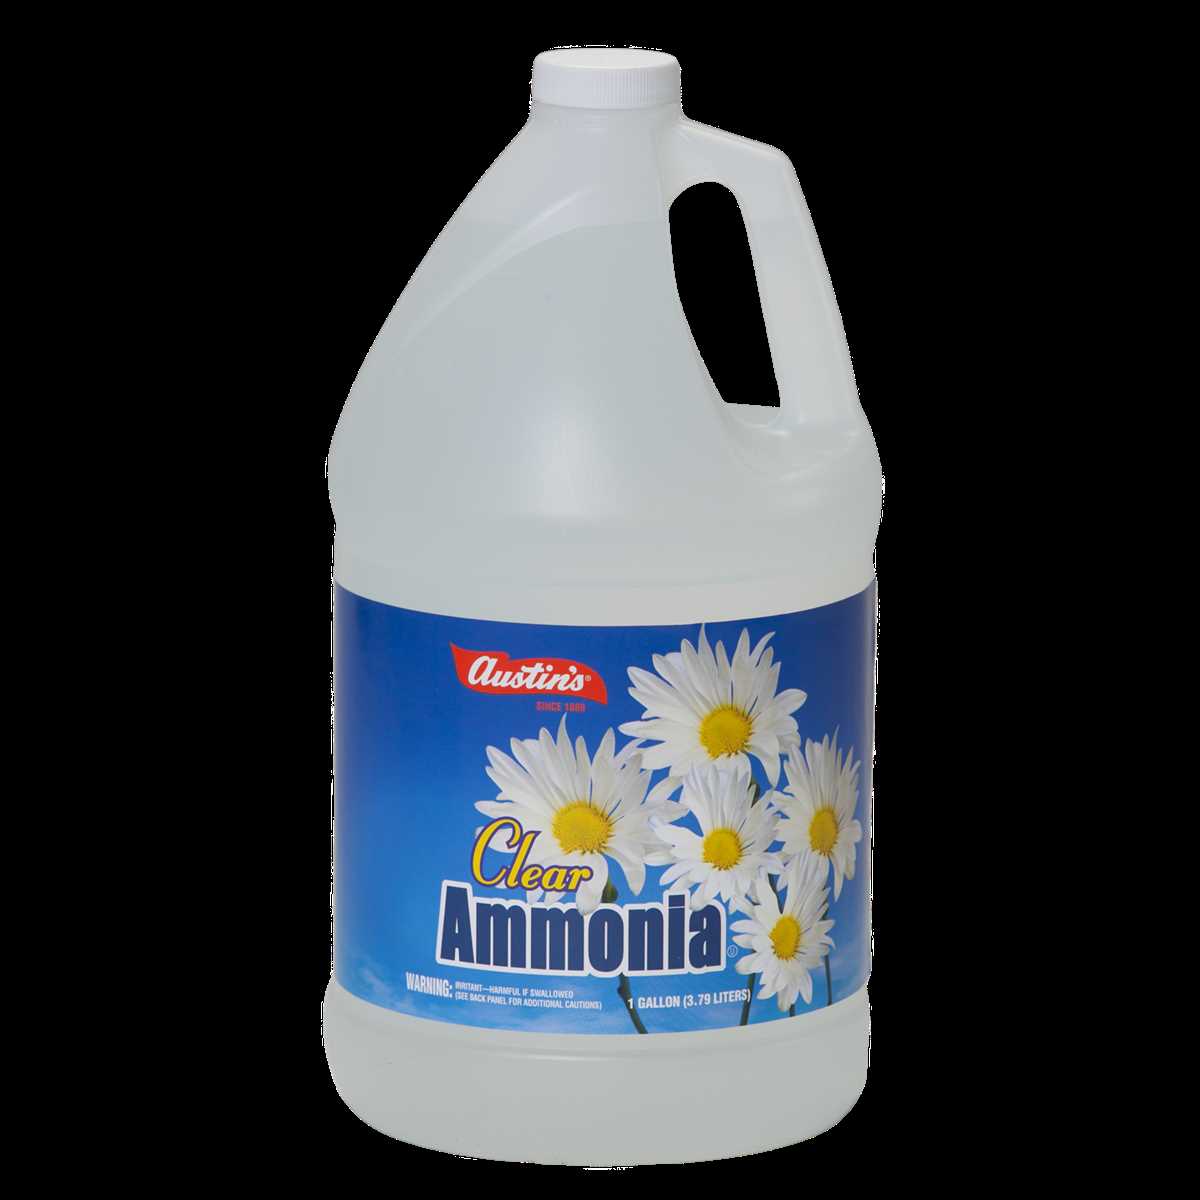 Important Tips to Remember When Handling Ammonia